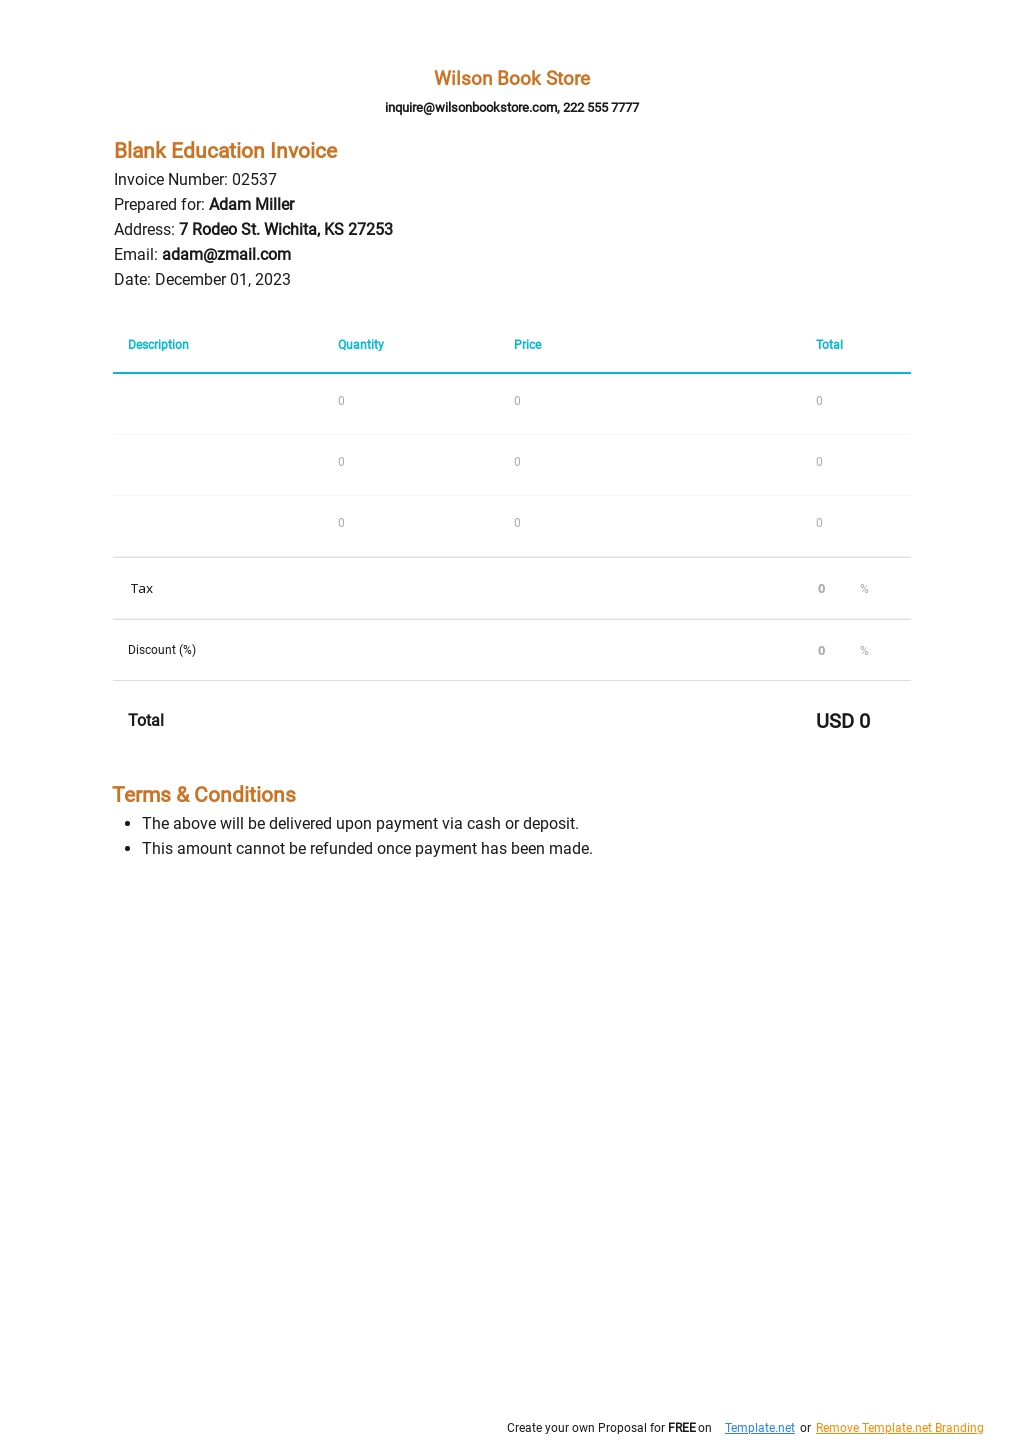 Free Blank Education Invoice Template - Google Docs, Google Sheets, Excel, Word